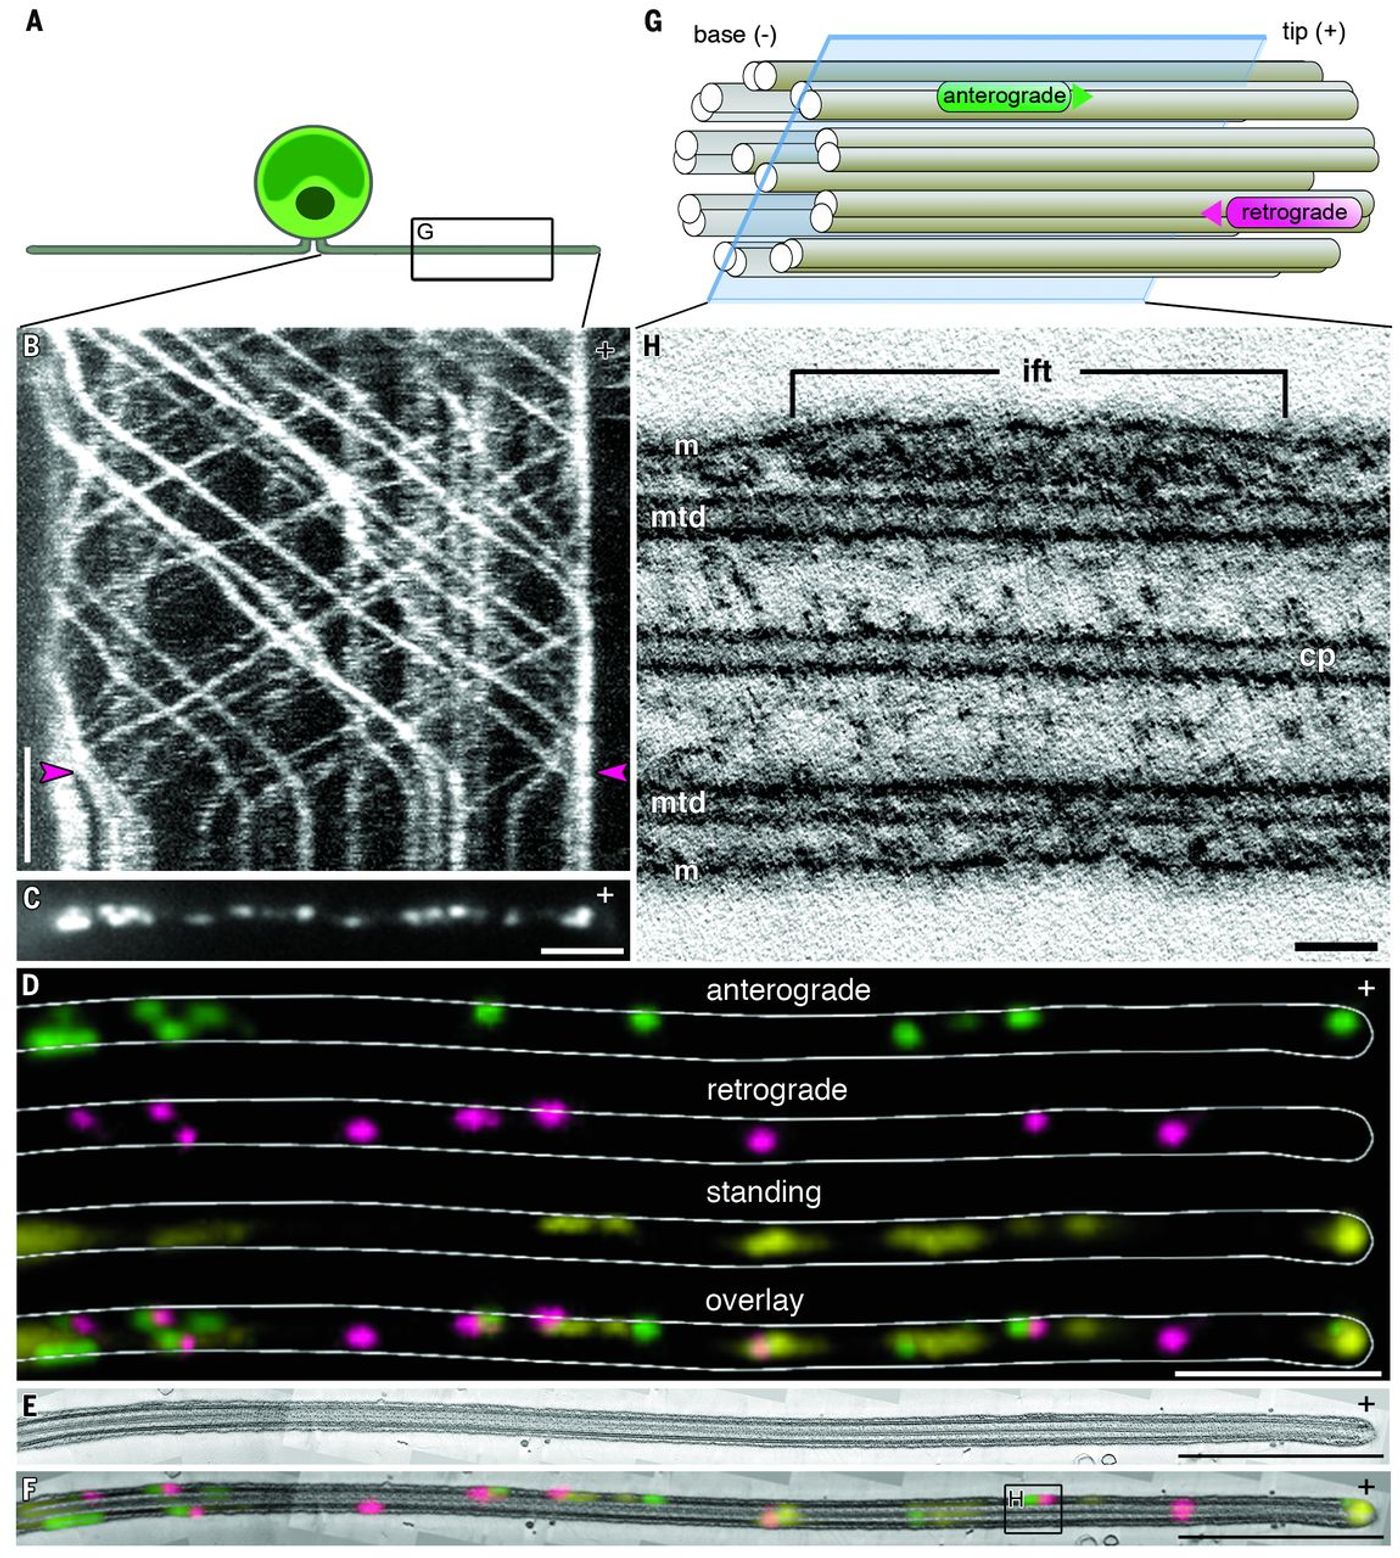 (A) A Chlamydomonas cell with gliding flagella - enlargement in (G). (B) Kymograph of fixation during live-cell imaging of Chlamydomonas. (C) TIRF microscopy image of the positions of IFT trains after fixation. (D) Each IFT train was color-coded according to the direction of movement: anterograde, green; retrograde, magenta; and standing, yellow. (E) Longitudinal section through the cilium 3D reconstruction. (F) Overlay of fluorescence and EM images on the section shown in (E) - enlarged in (H). (G) Diagram of anterograde and retrograde trains traveling along microtubule doublets. The plane of the virtual slice in (H) is marked. (H) Virtual slice through the tomogram, containing an anterograde IFT train